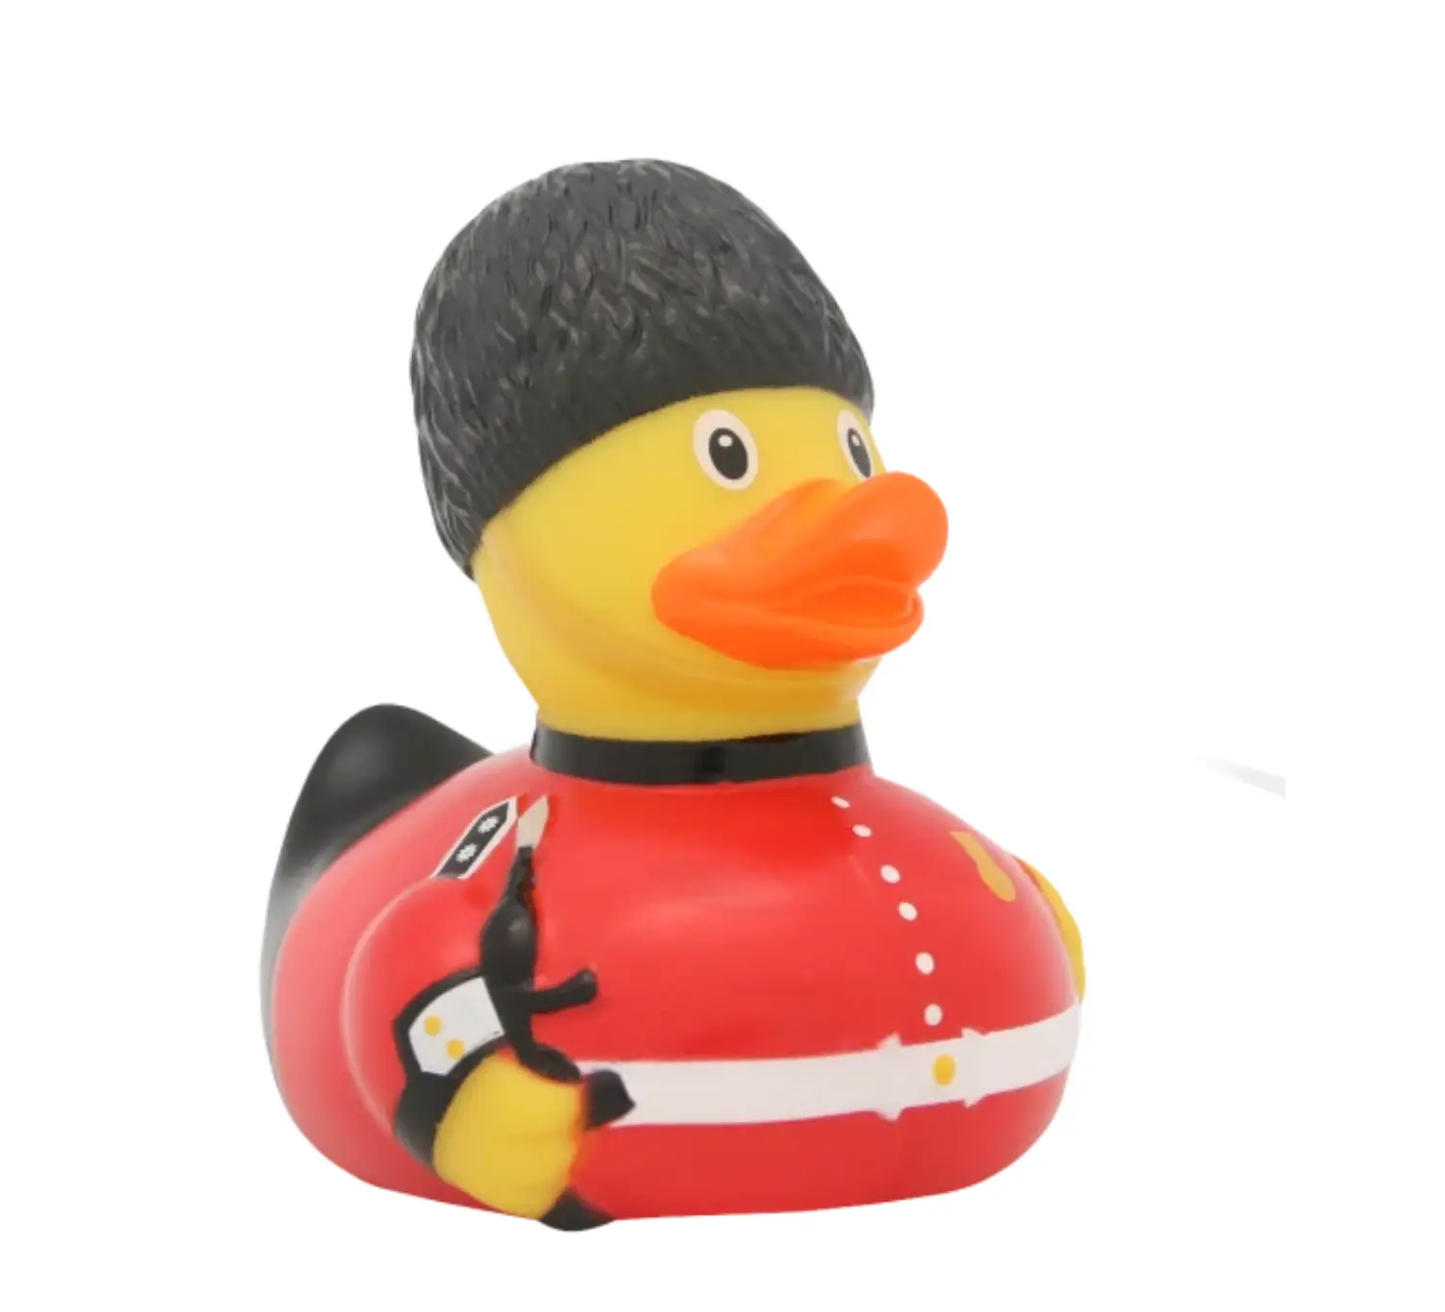 Guardsman Rubber Duck Right Side Angle View